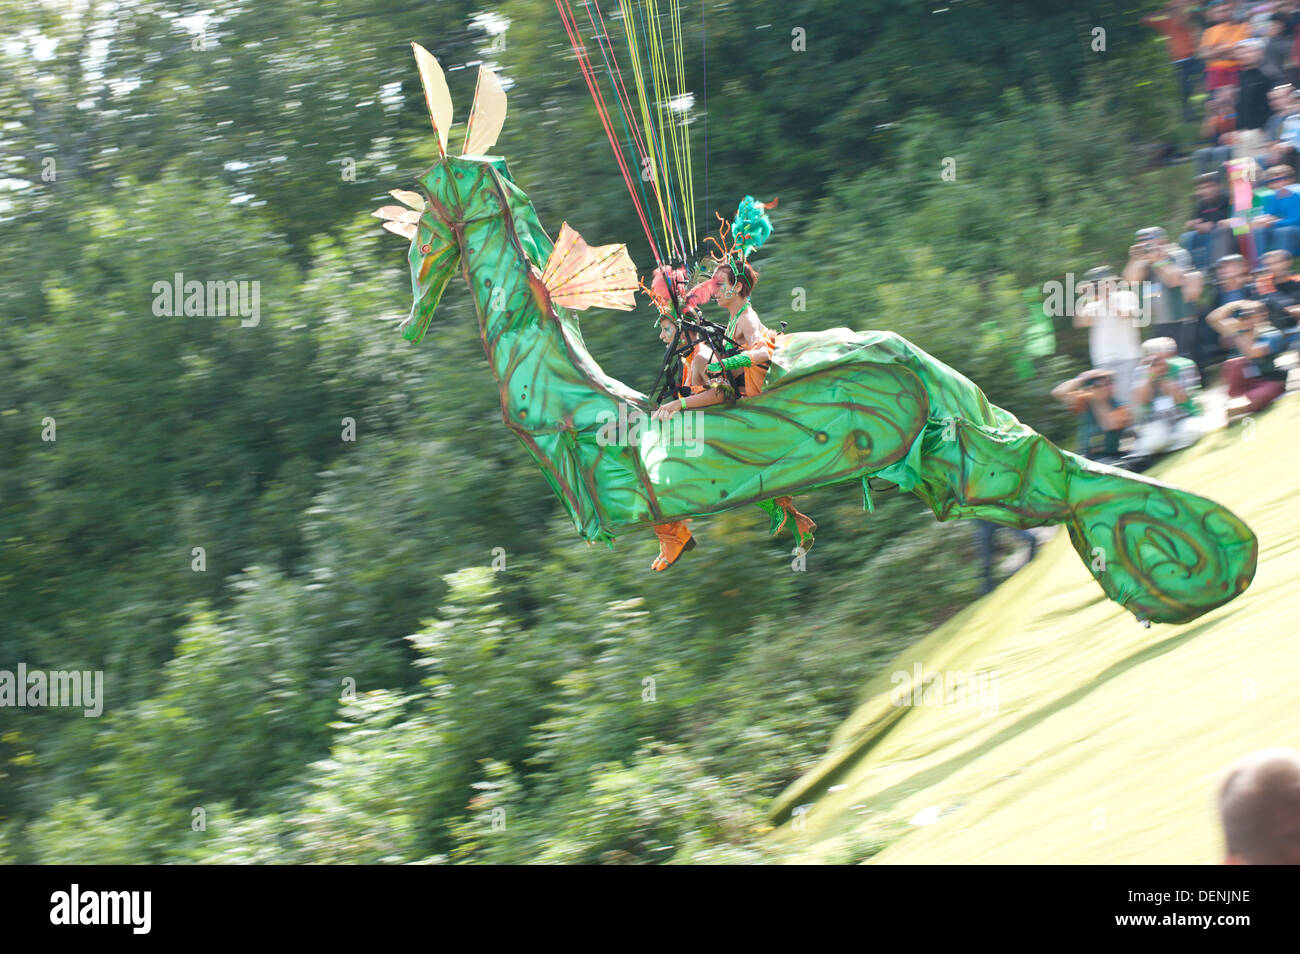 St Hilaire Du Touvet, France. 22nd Sep, 2013. On a perfect late summer day thousands of spectators flock to the spectacle of paraglider pilots taking off from an alpine cliff face dressed up in elaborate fancy dress. Photo credit: Graham M. Lawrence/Alamy Live News. Stock Photo